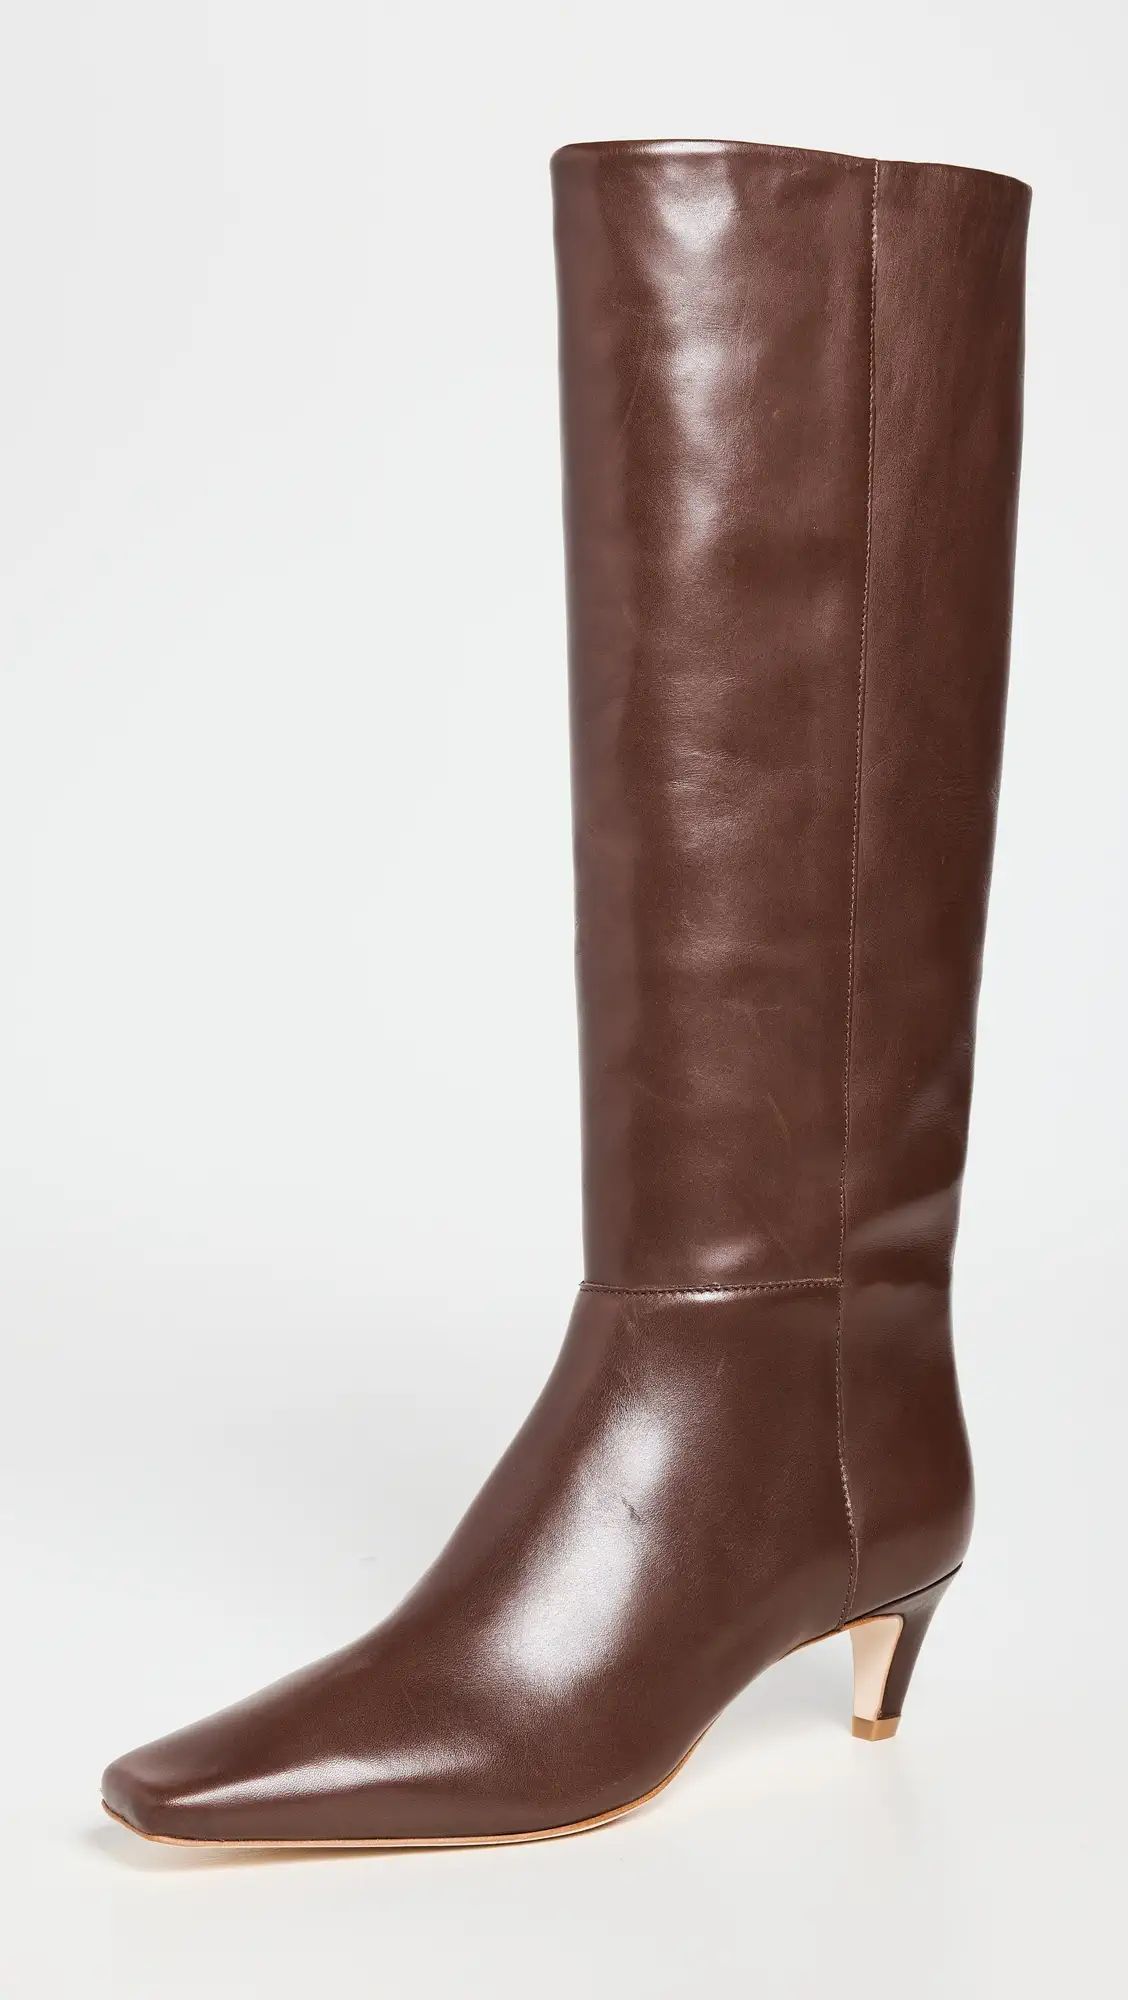 Reformation Remy Boots | Shopbop | Shopbop